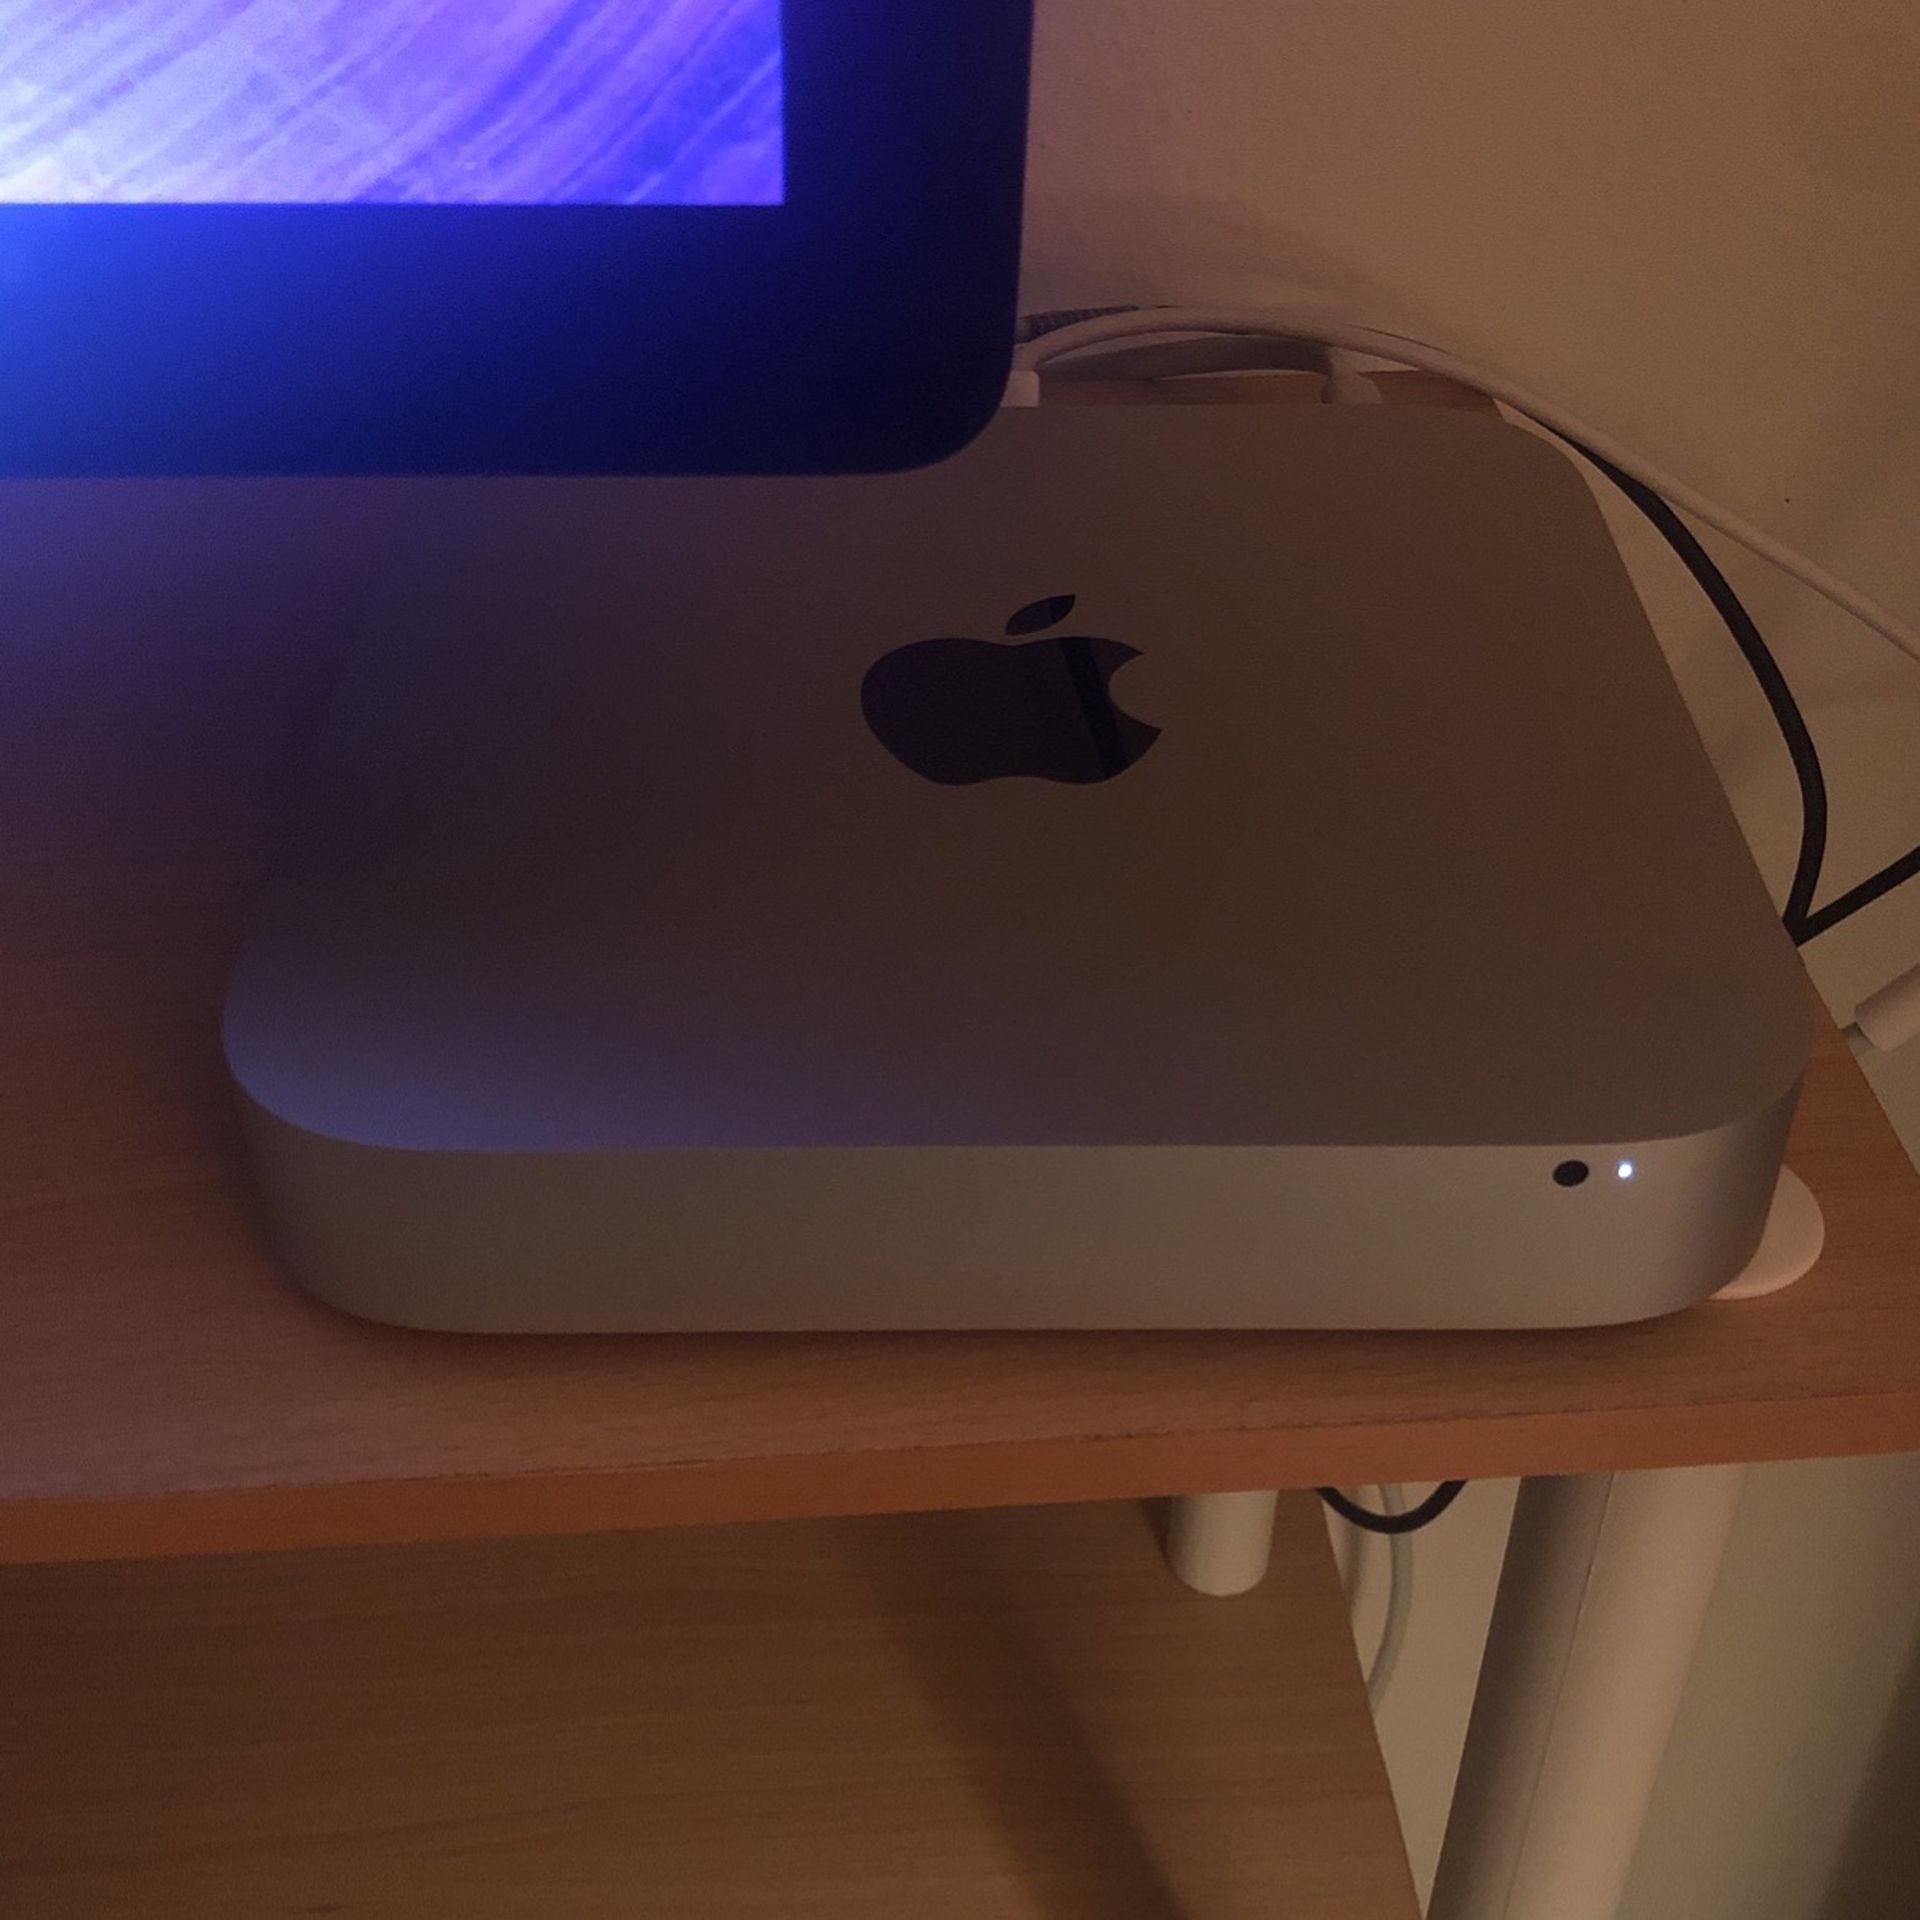 Mac Mini With 27” Thunderbolt Display And More